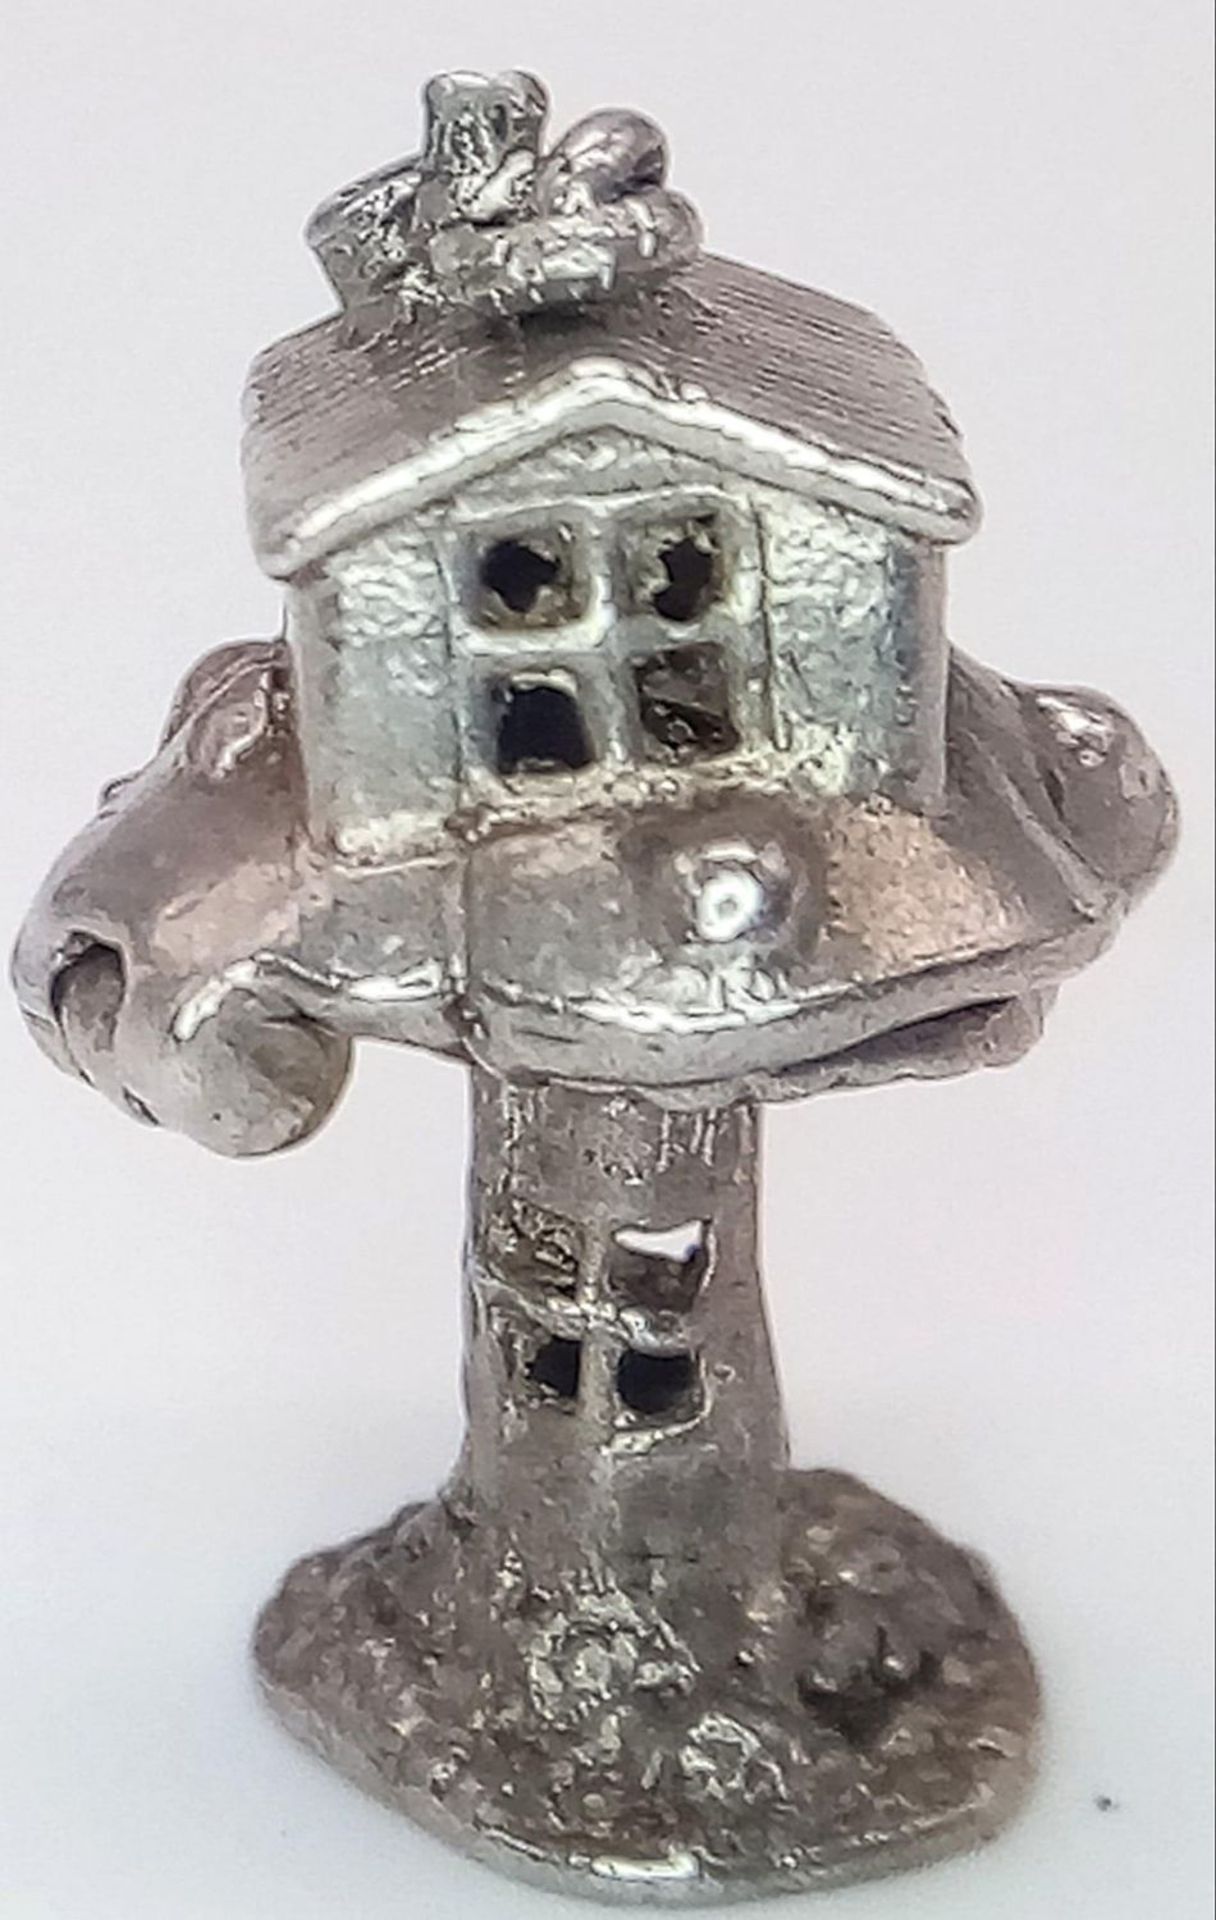 A VINTAGE STERLING SILVER TREE HOUSE CHARM, WHICH OPENS TO REVEAL A WIZARD INSIDE, WEIGHT 4G - Image 3 of 8